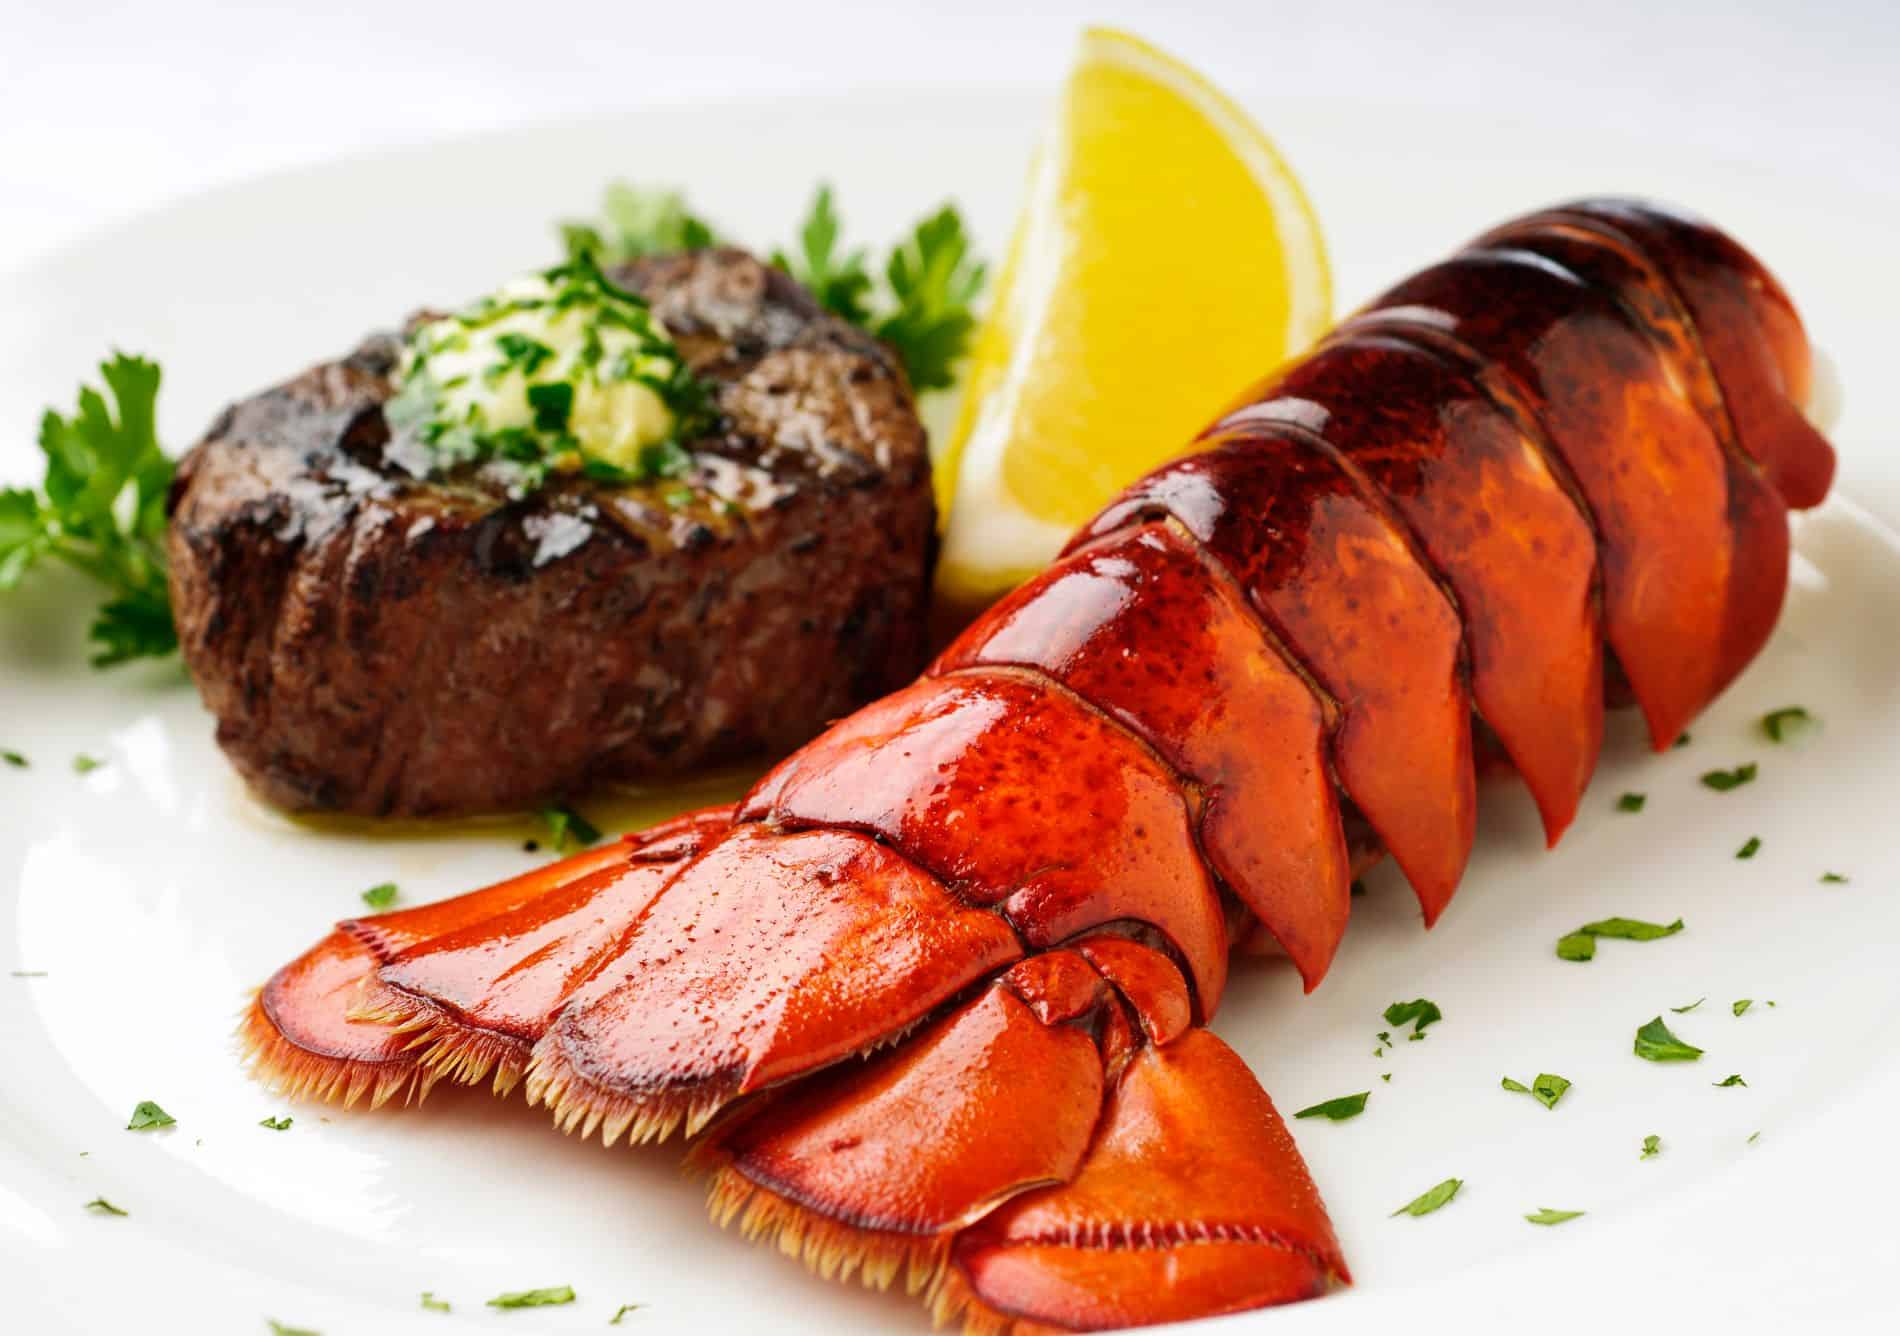 A plate of steak and lobster with a lemon wedge